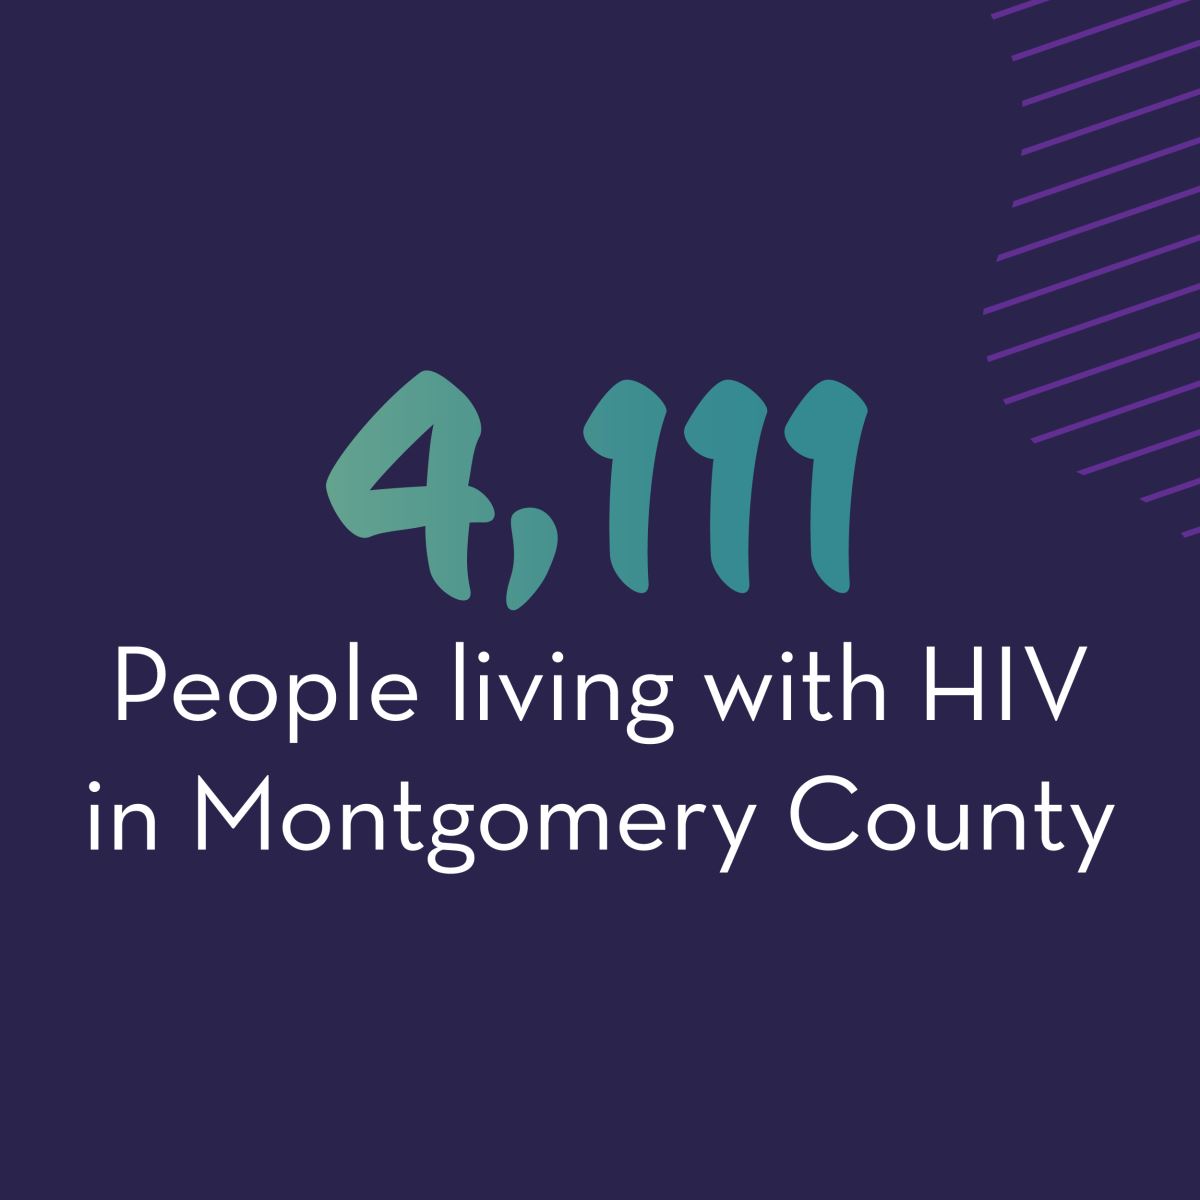 4,111 living with HIV in Montgomery County